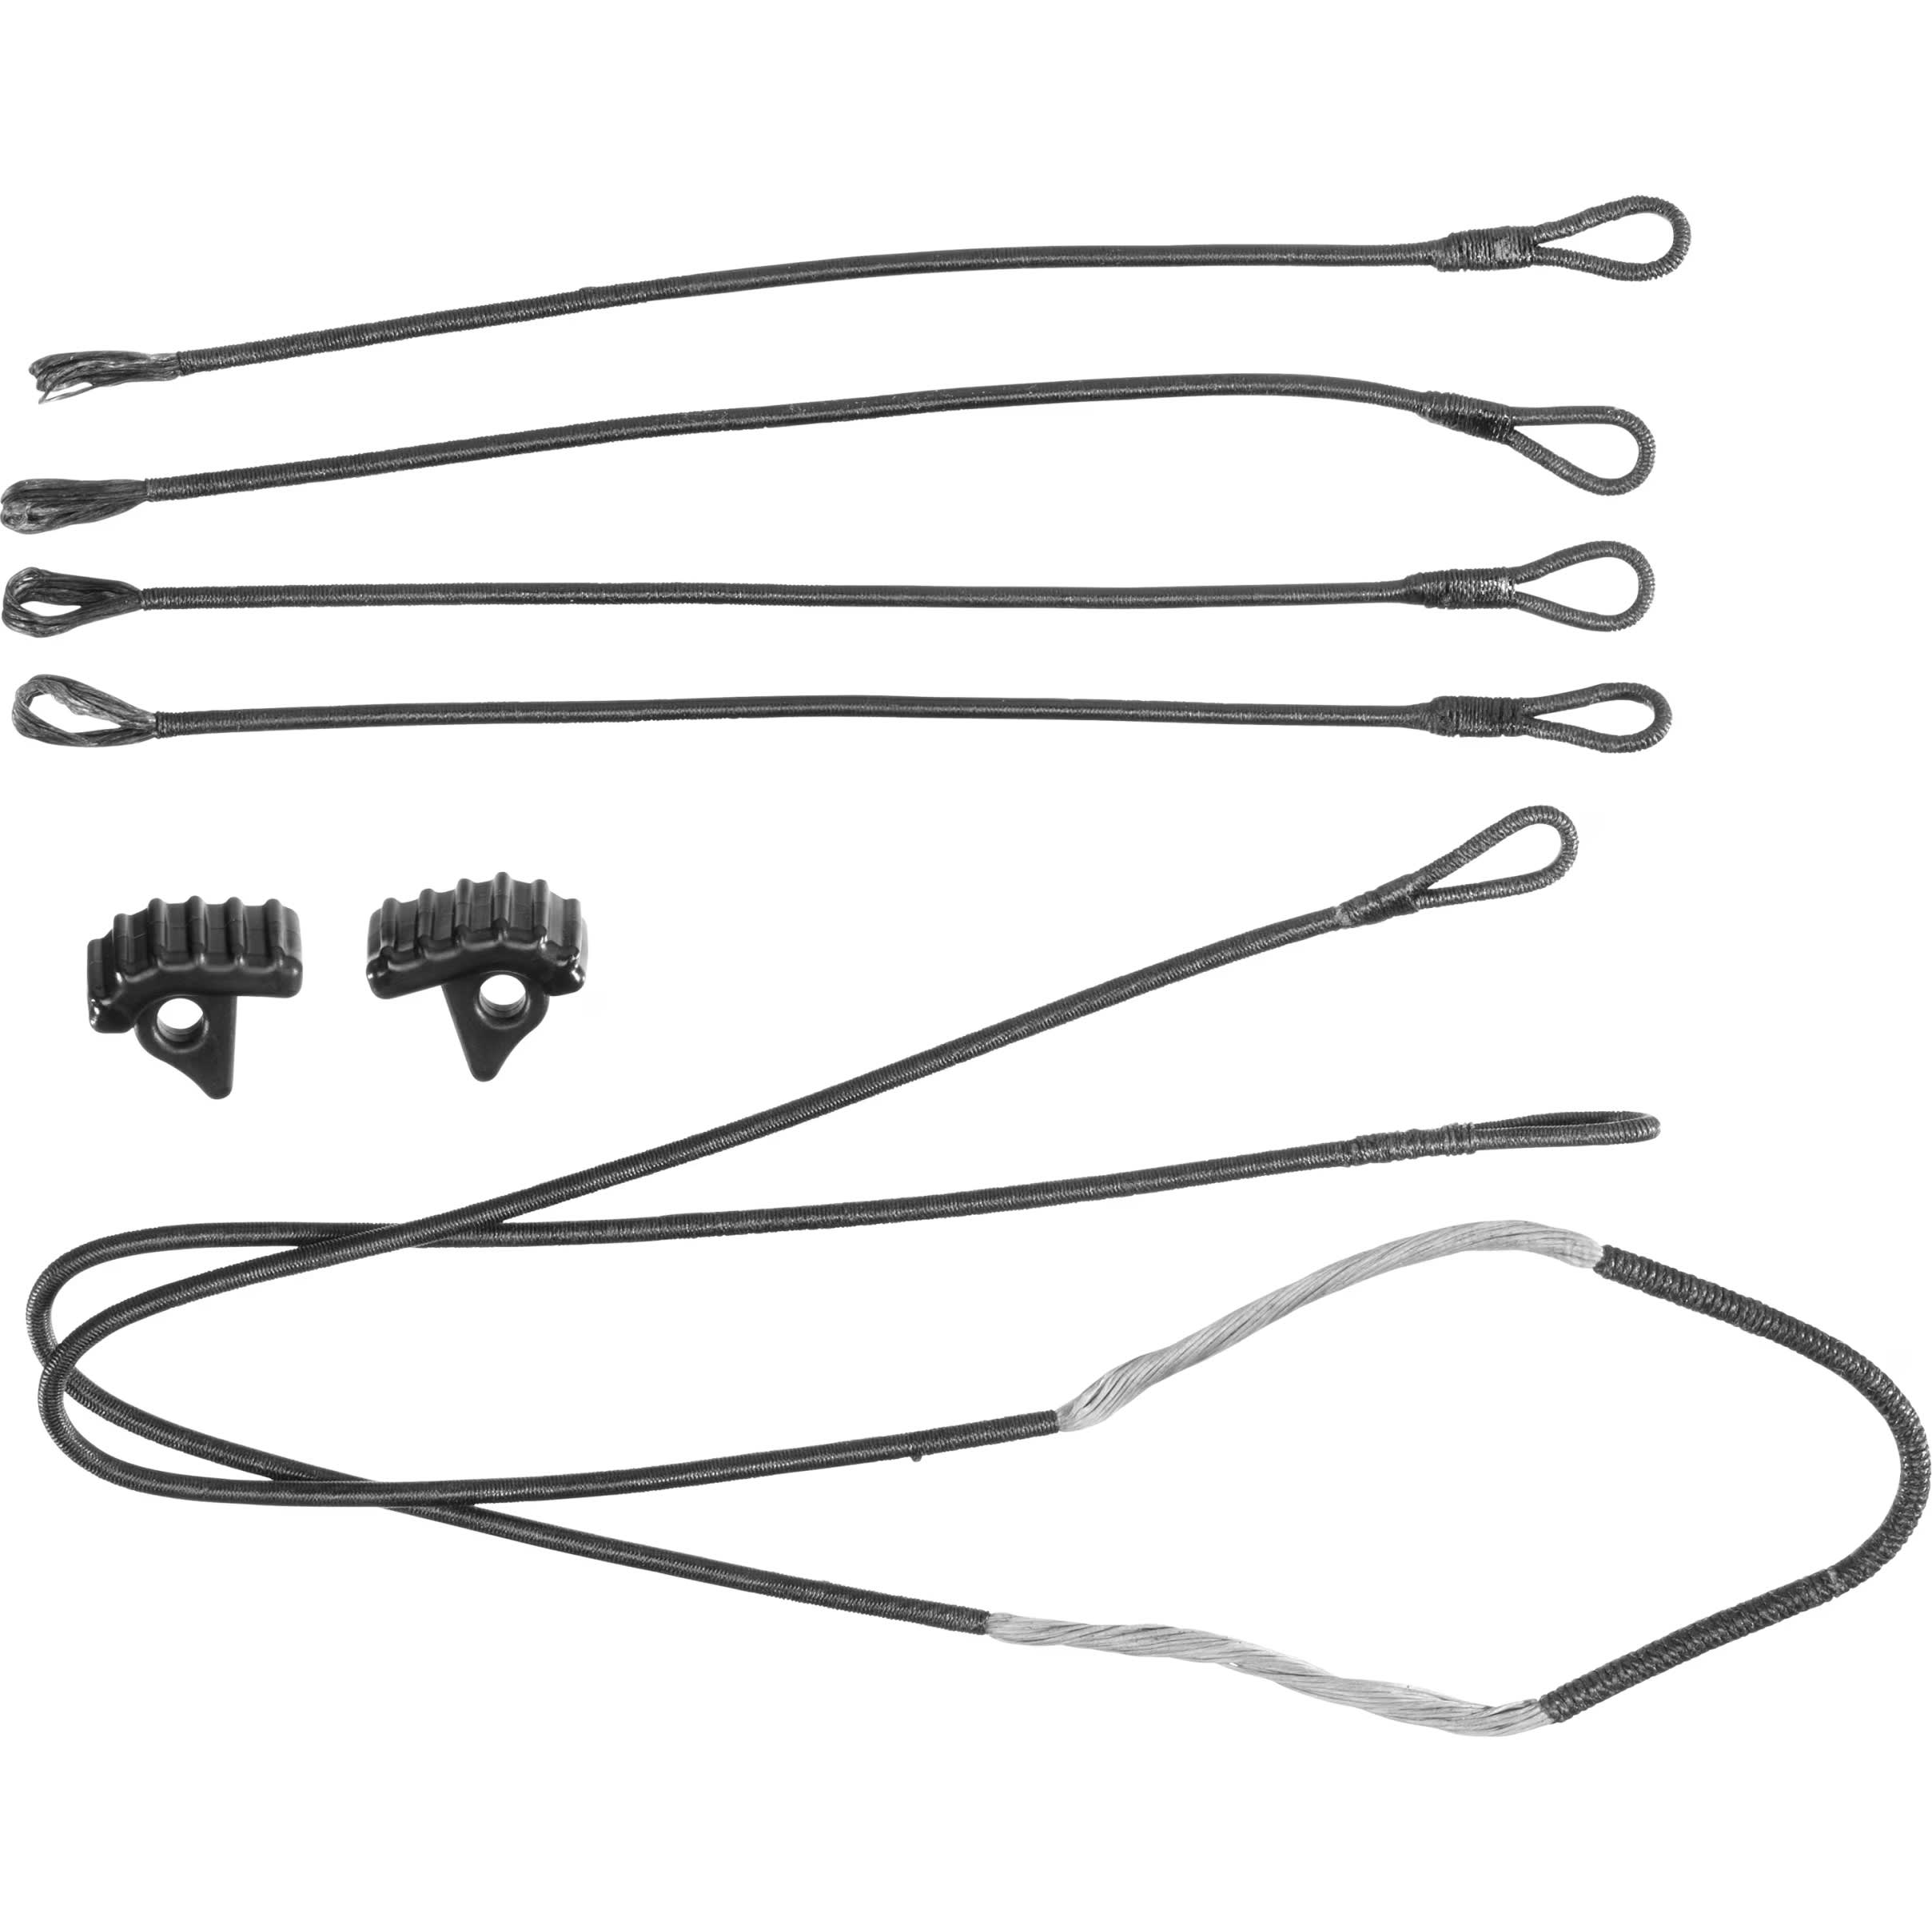 Ravin® Crossbows Replacement String and Cables